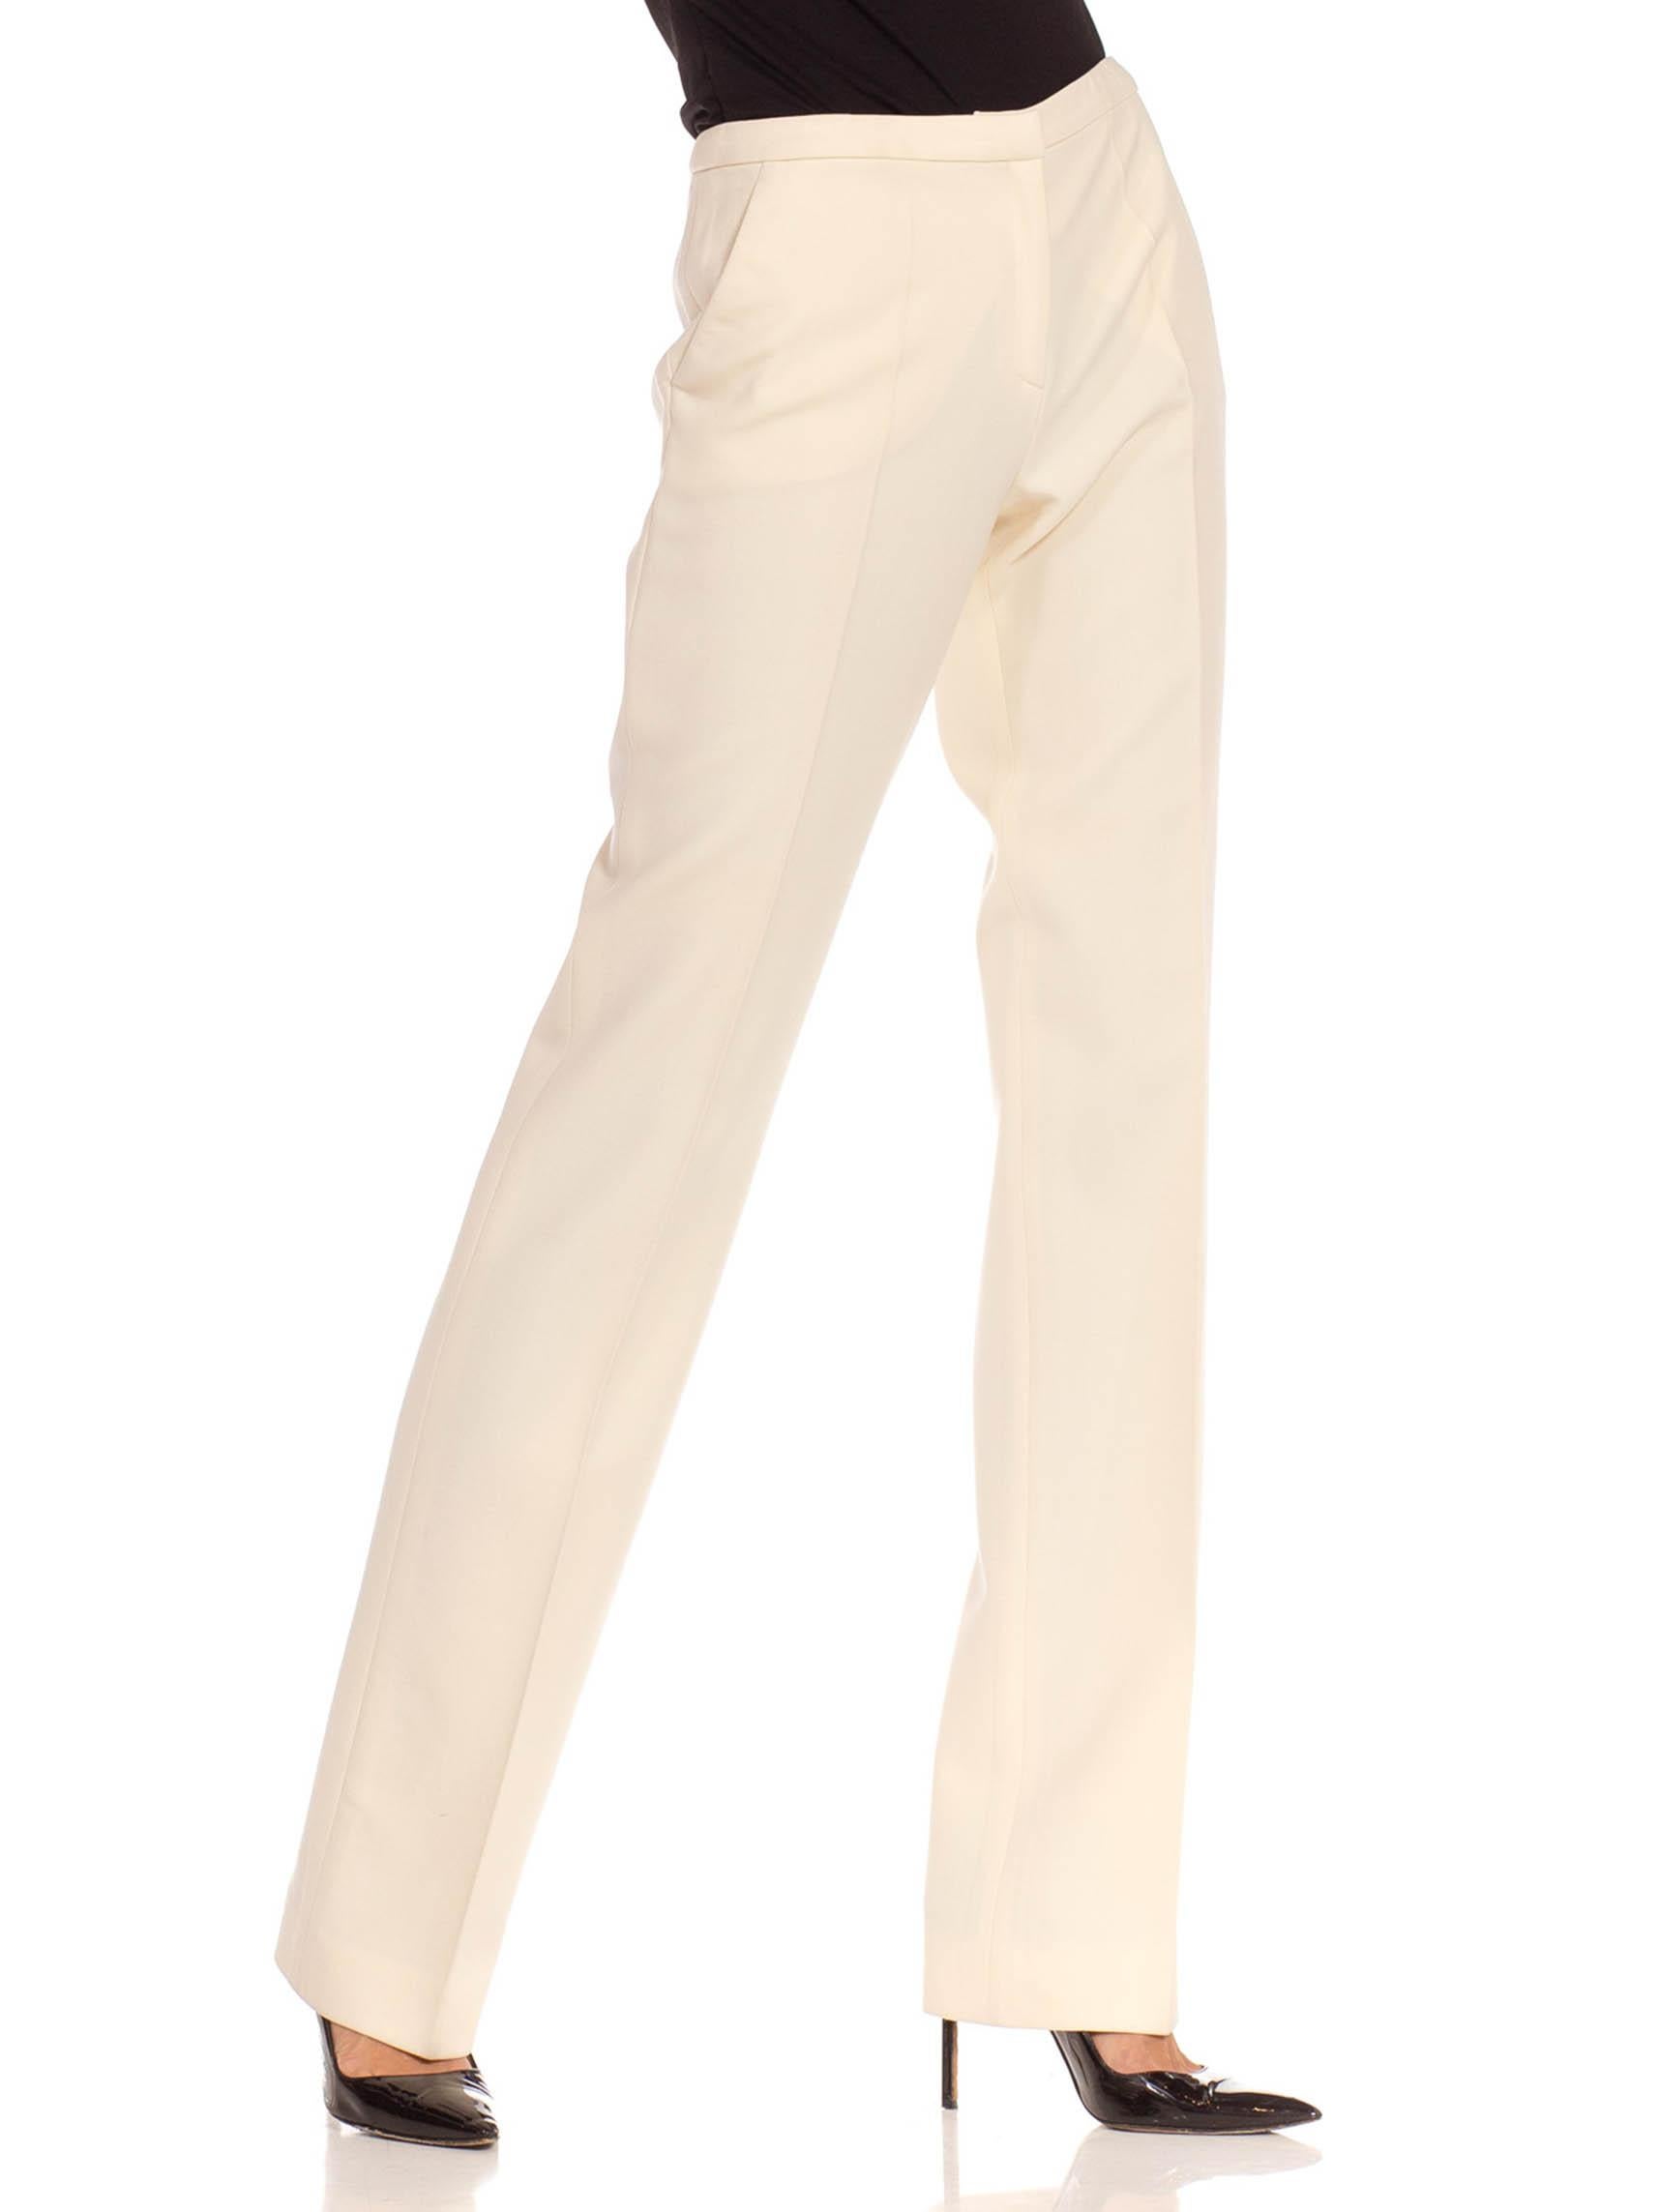 1990S Gianni Versace Cream Wool Crepe Cigarette Pants In Excellent Condition For Sale In New York, NY